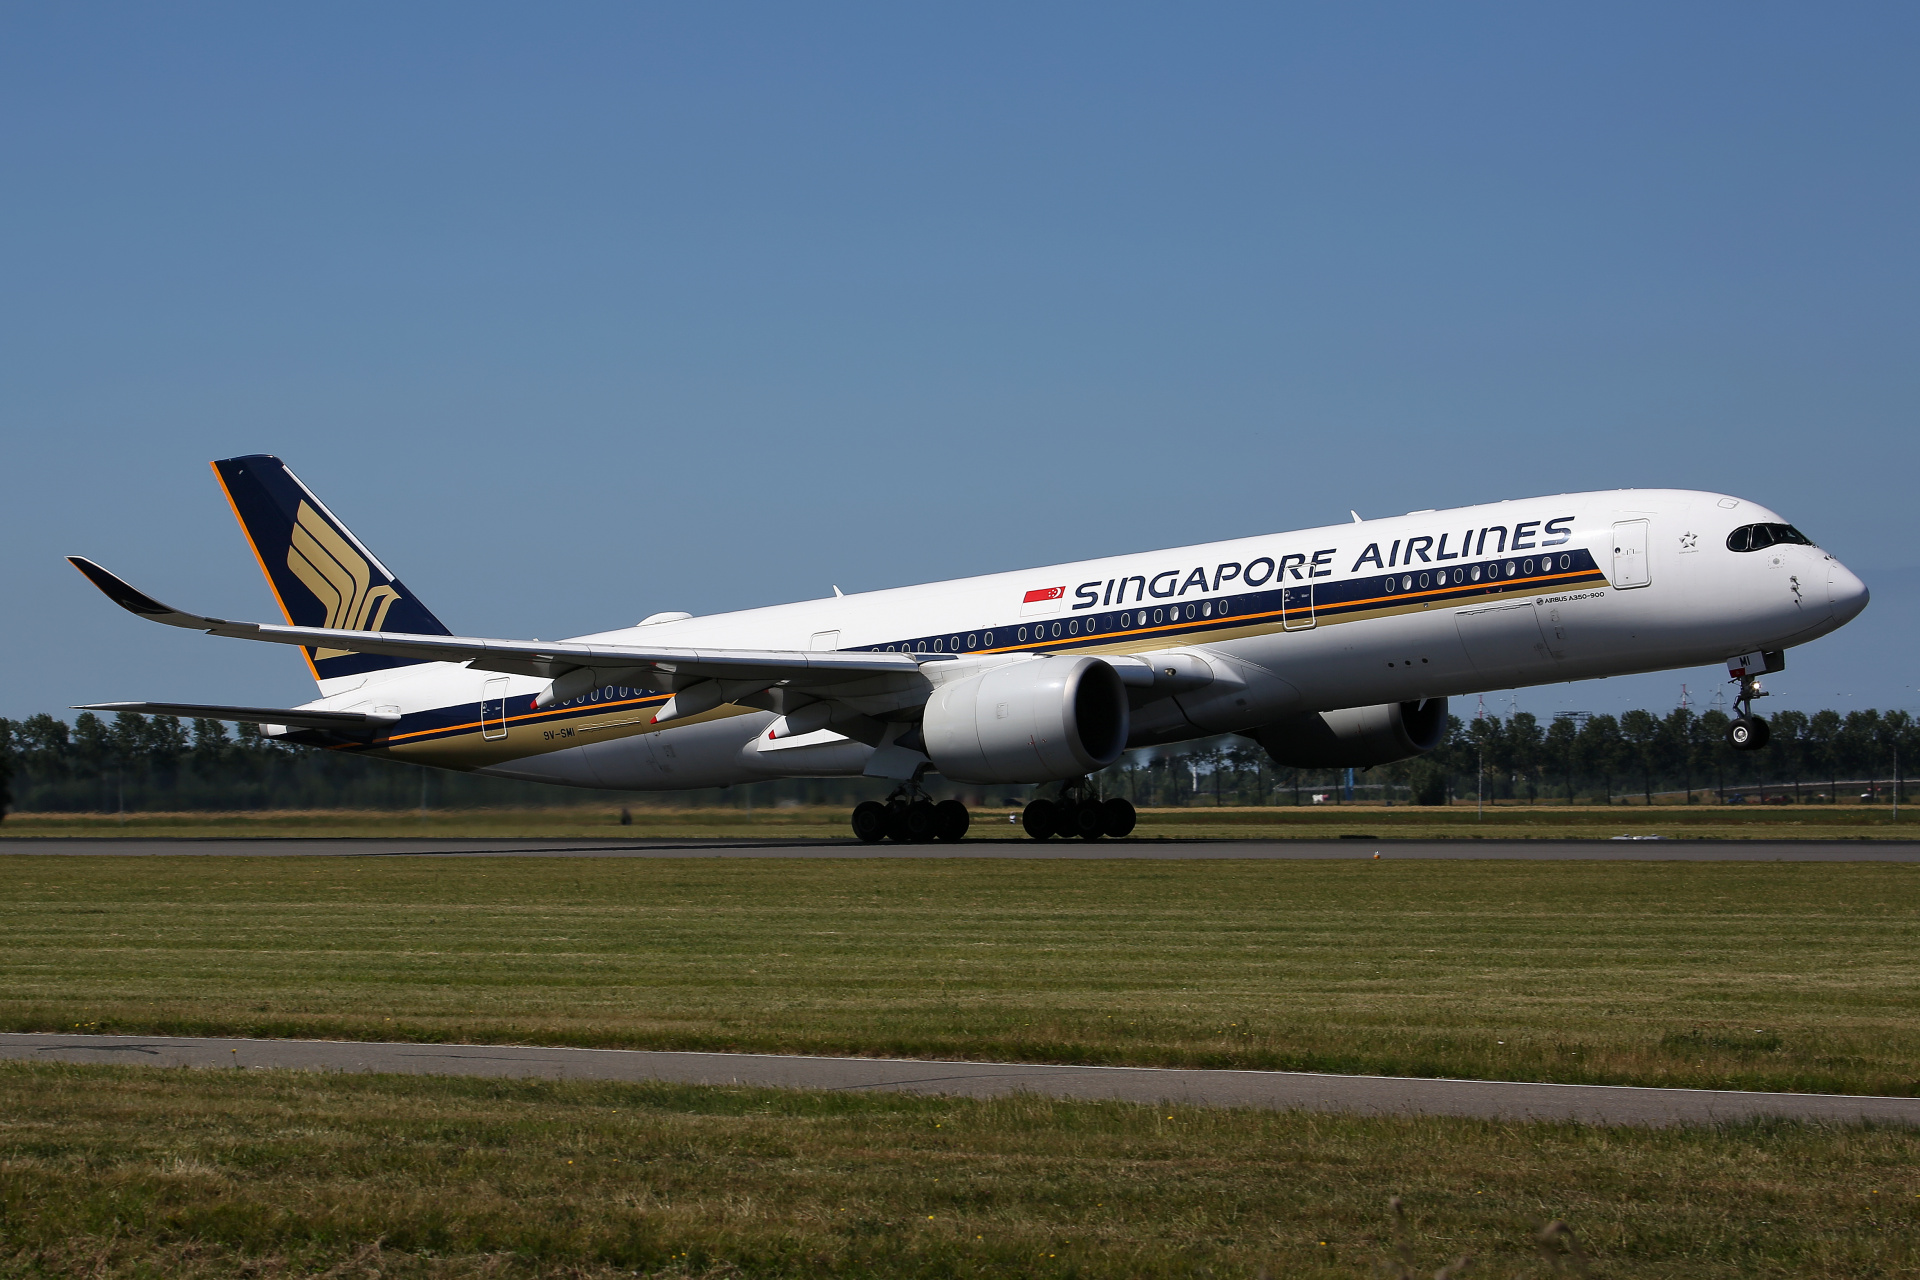 9V-SMI, Singapore Airlines (Aircraft » Schiphol Spotting » Airbus A350-900)